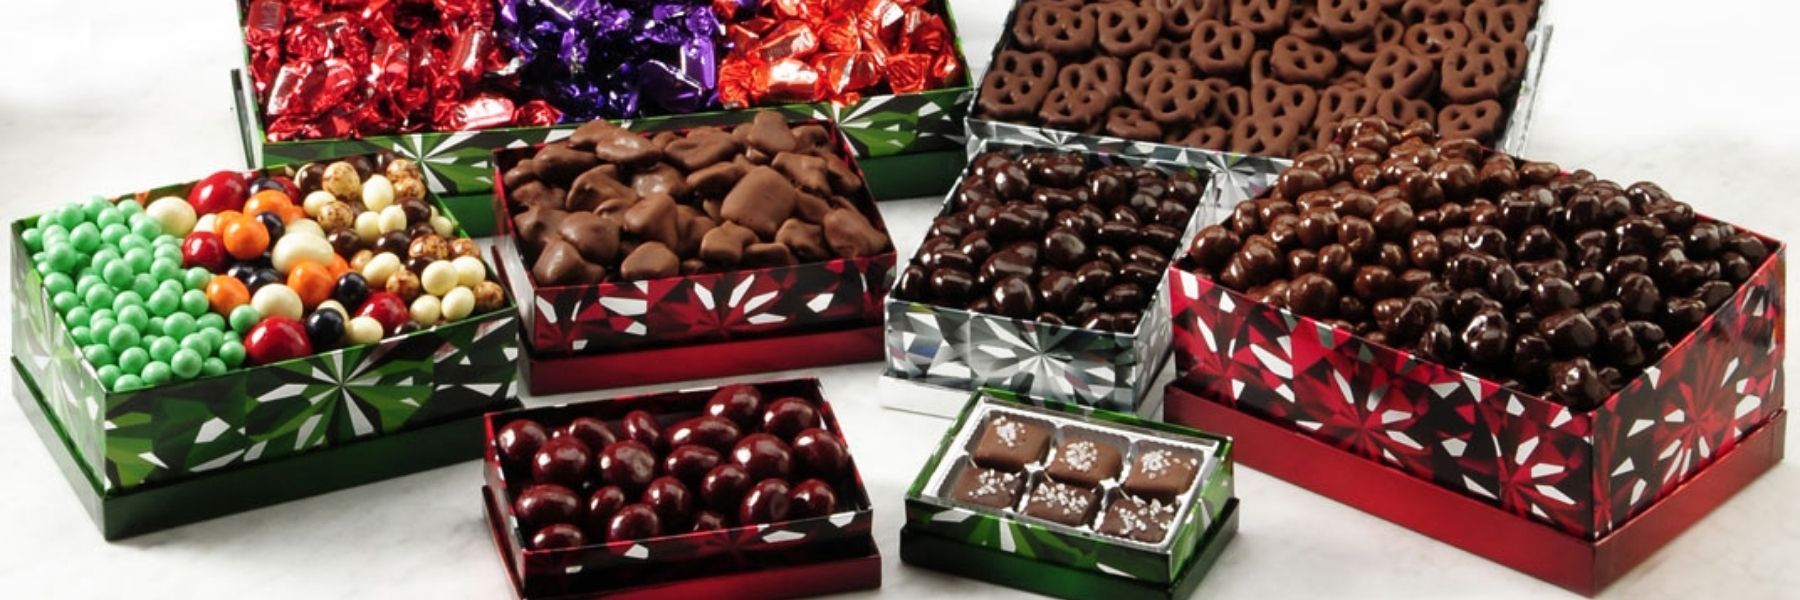 The Perfect Holiday Gift: The Magnificent Chocolate Gift Tower - Deluxe Chocolate Assortment